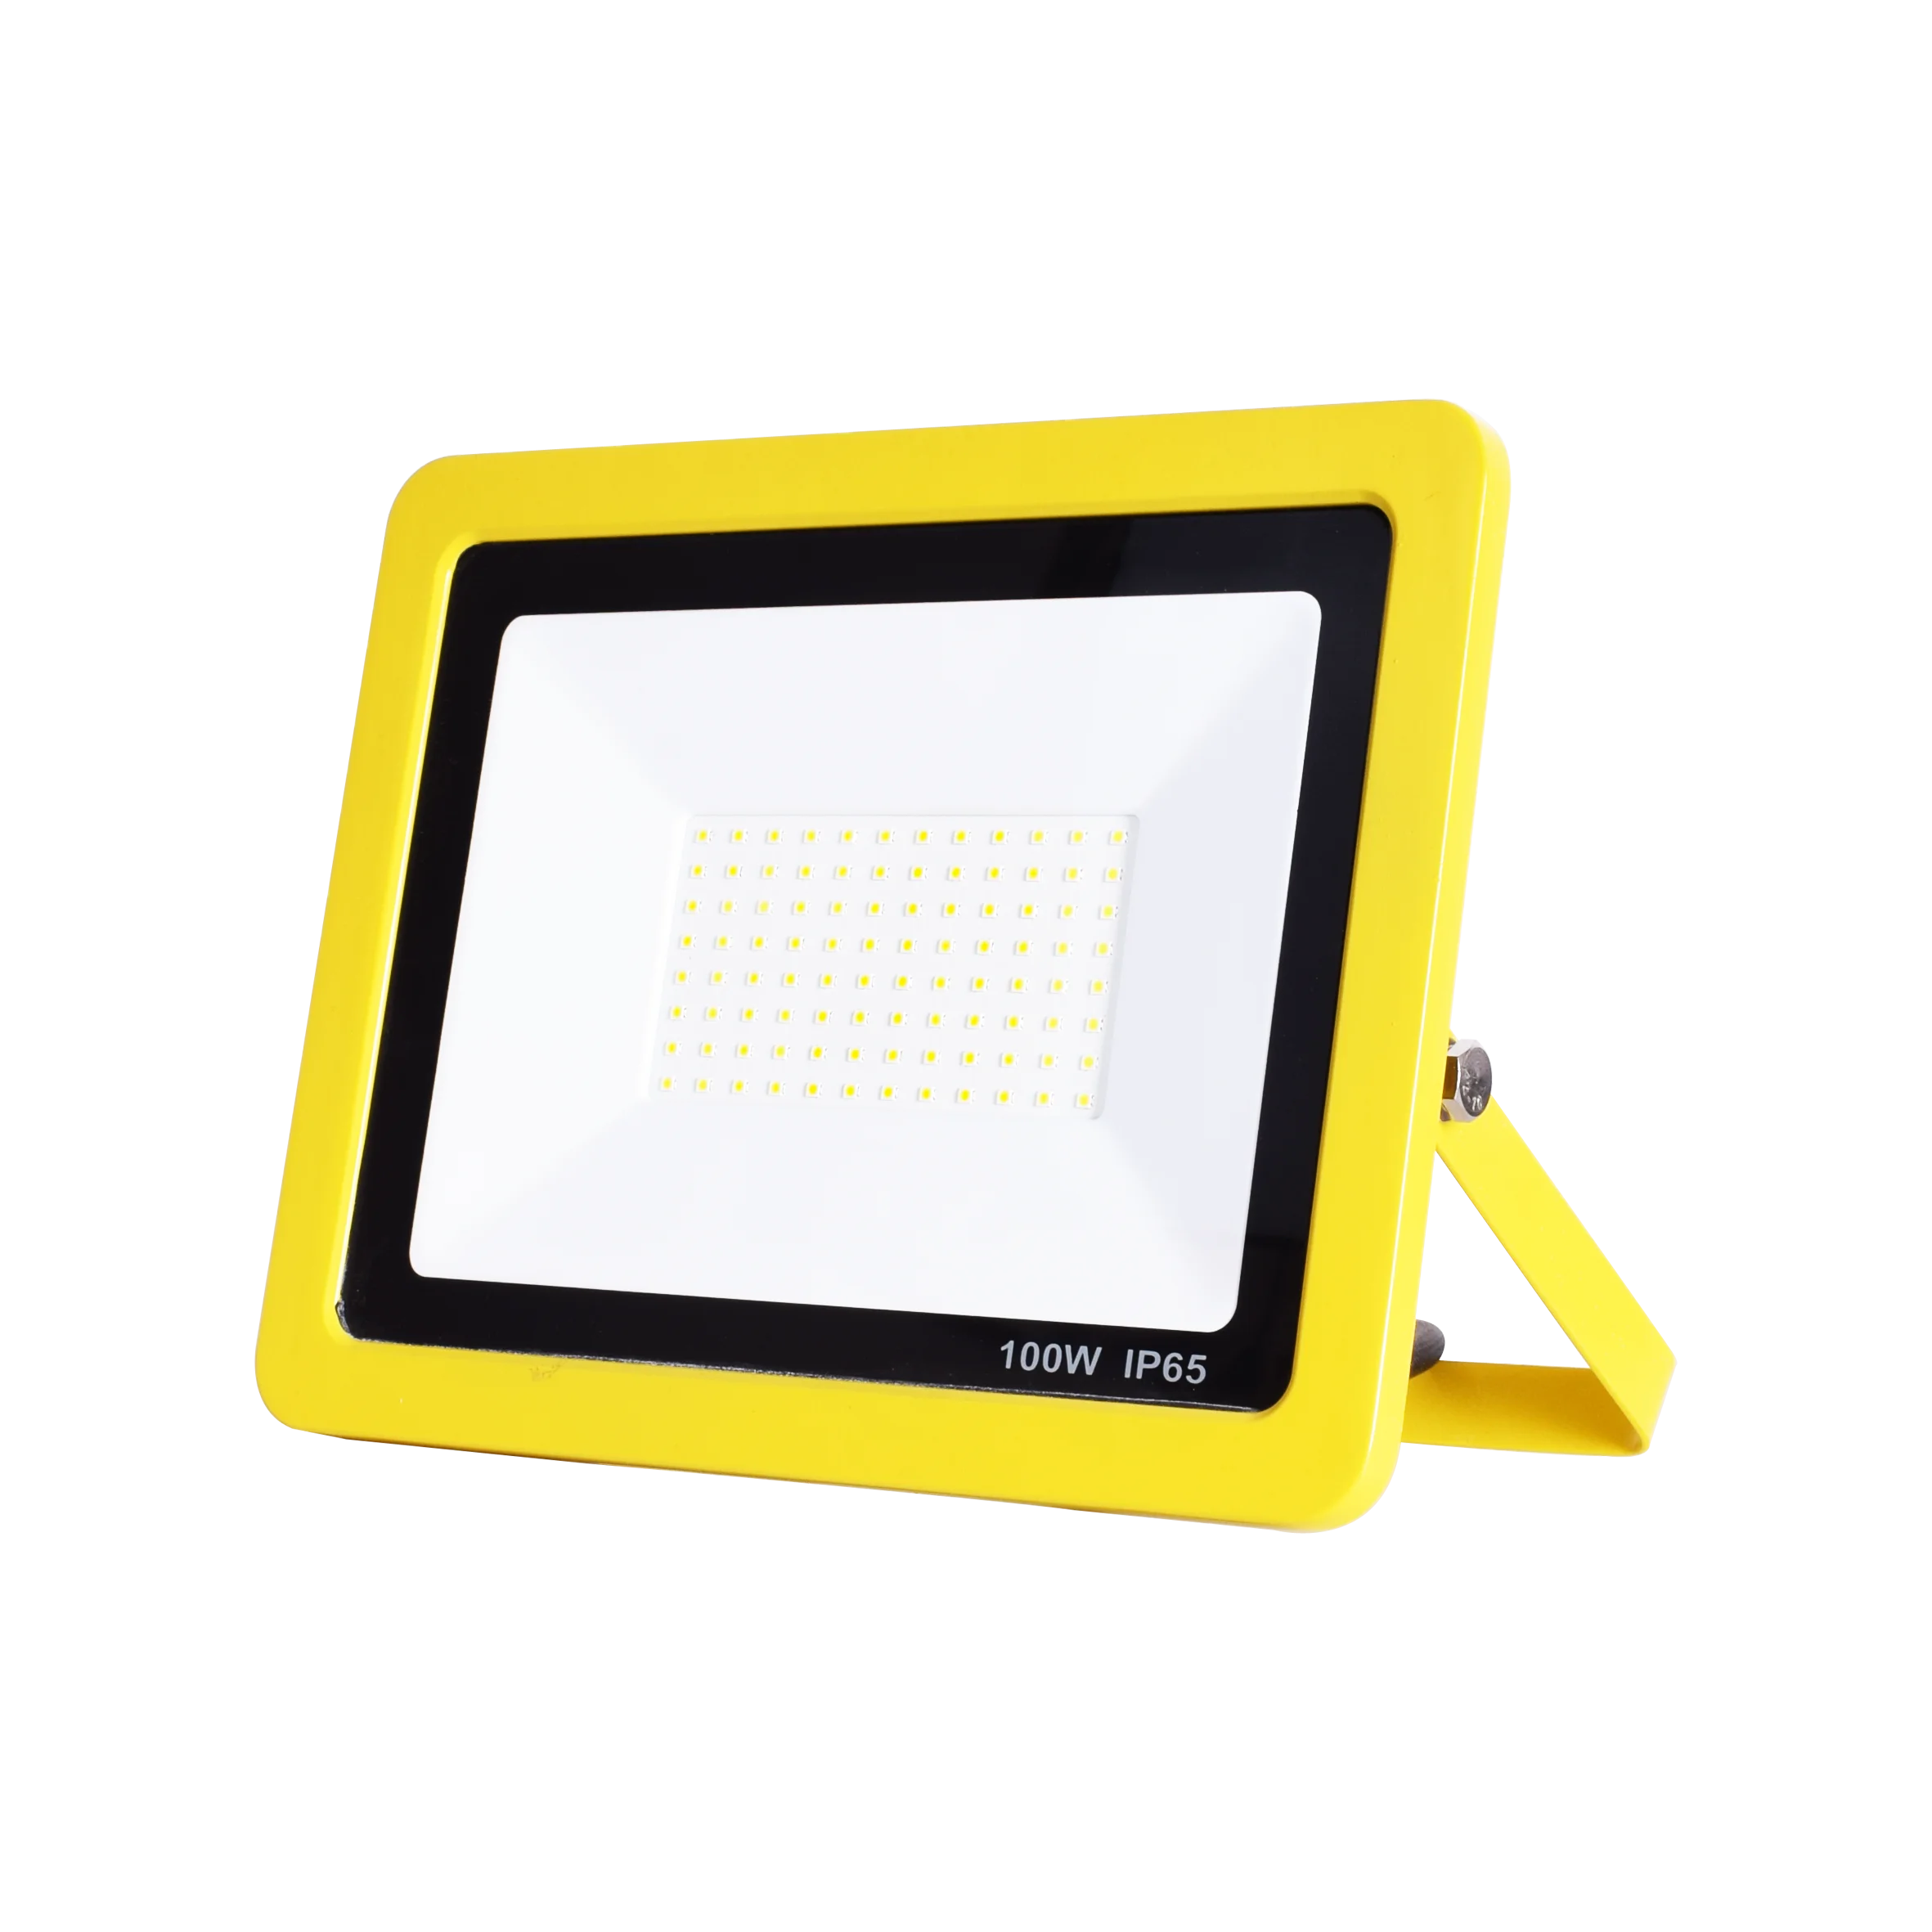 DOB LED FLOOD LIGHT 100w yellow color with die casting aluminum housing